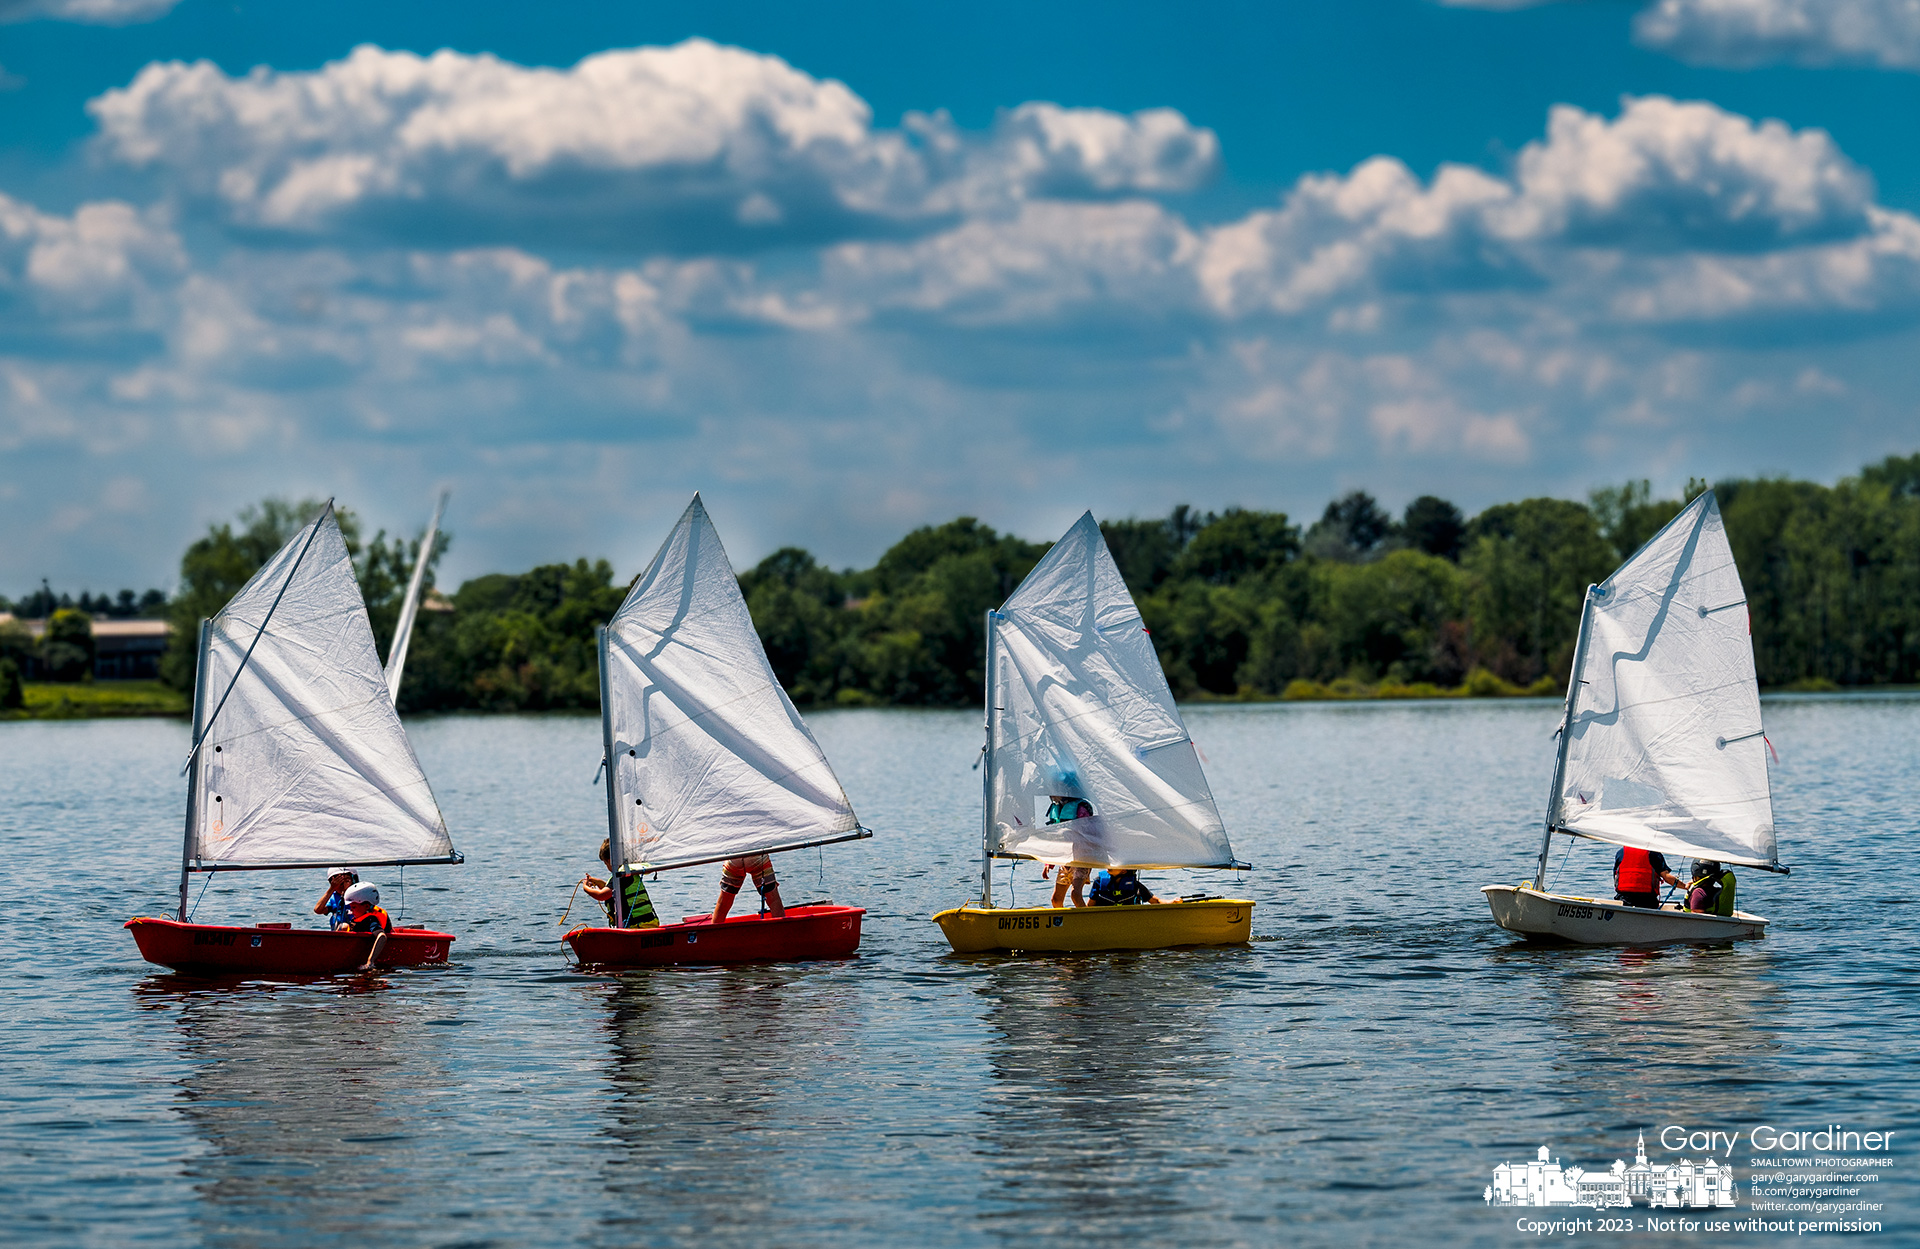 A quartet of two-man sailing teams slowly move in a line toward the docks at the Hoover Sailing Club after completing a sailing lesson on Hoover Reservoir. My Final Photo for July 10, 2023.